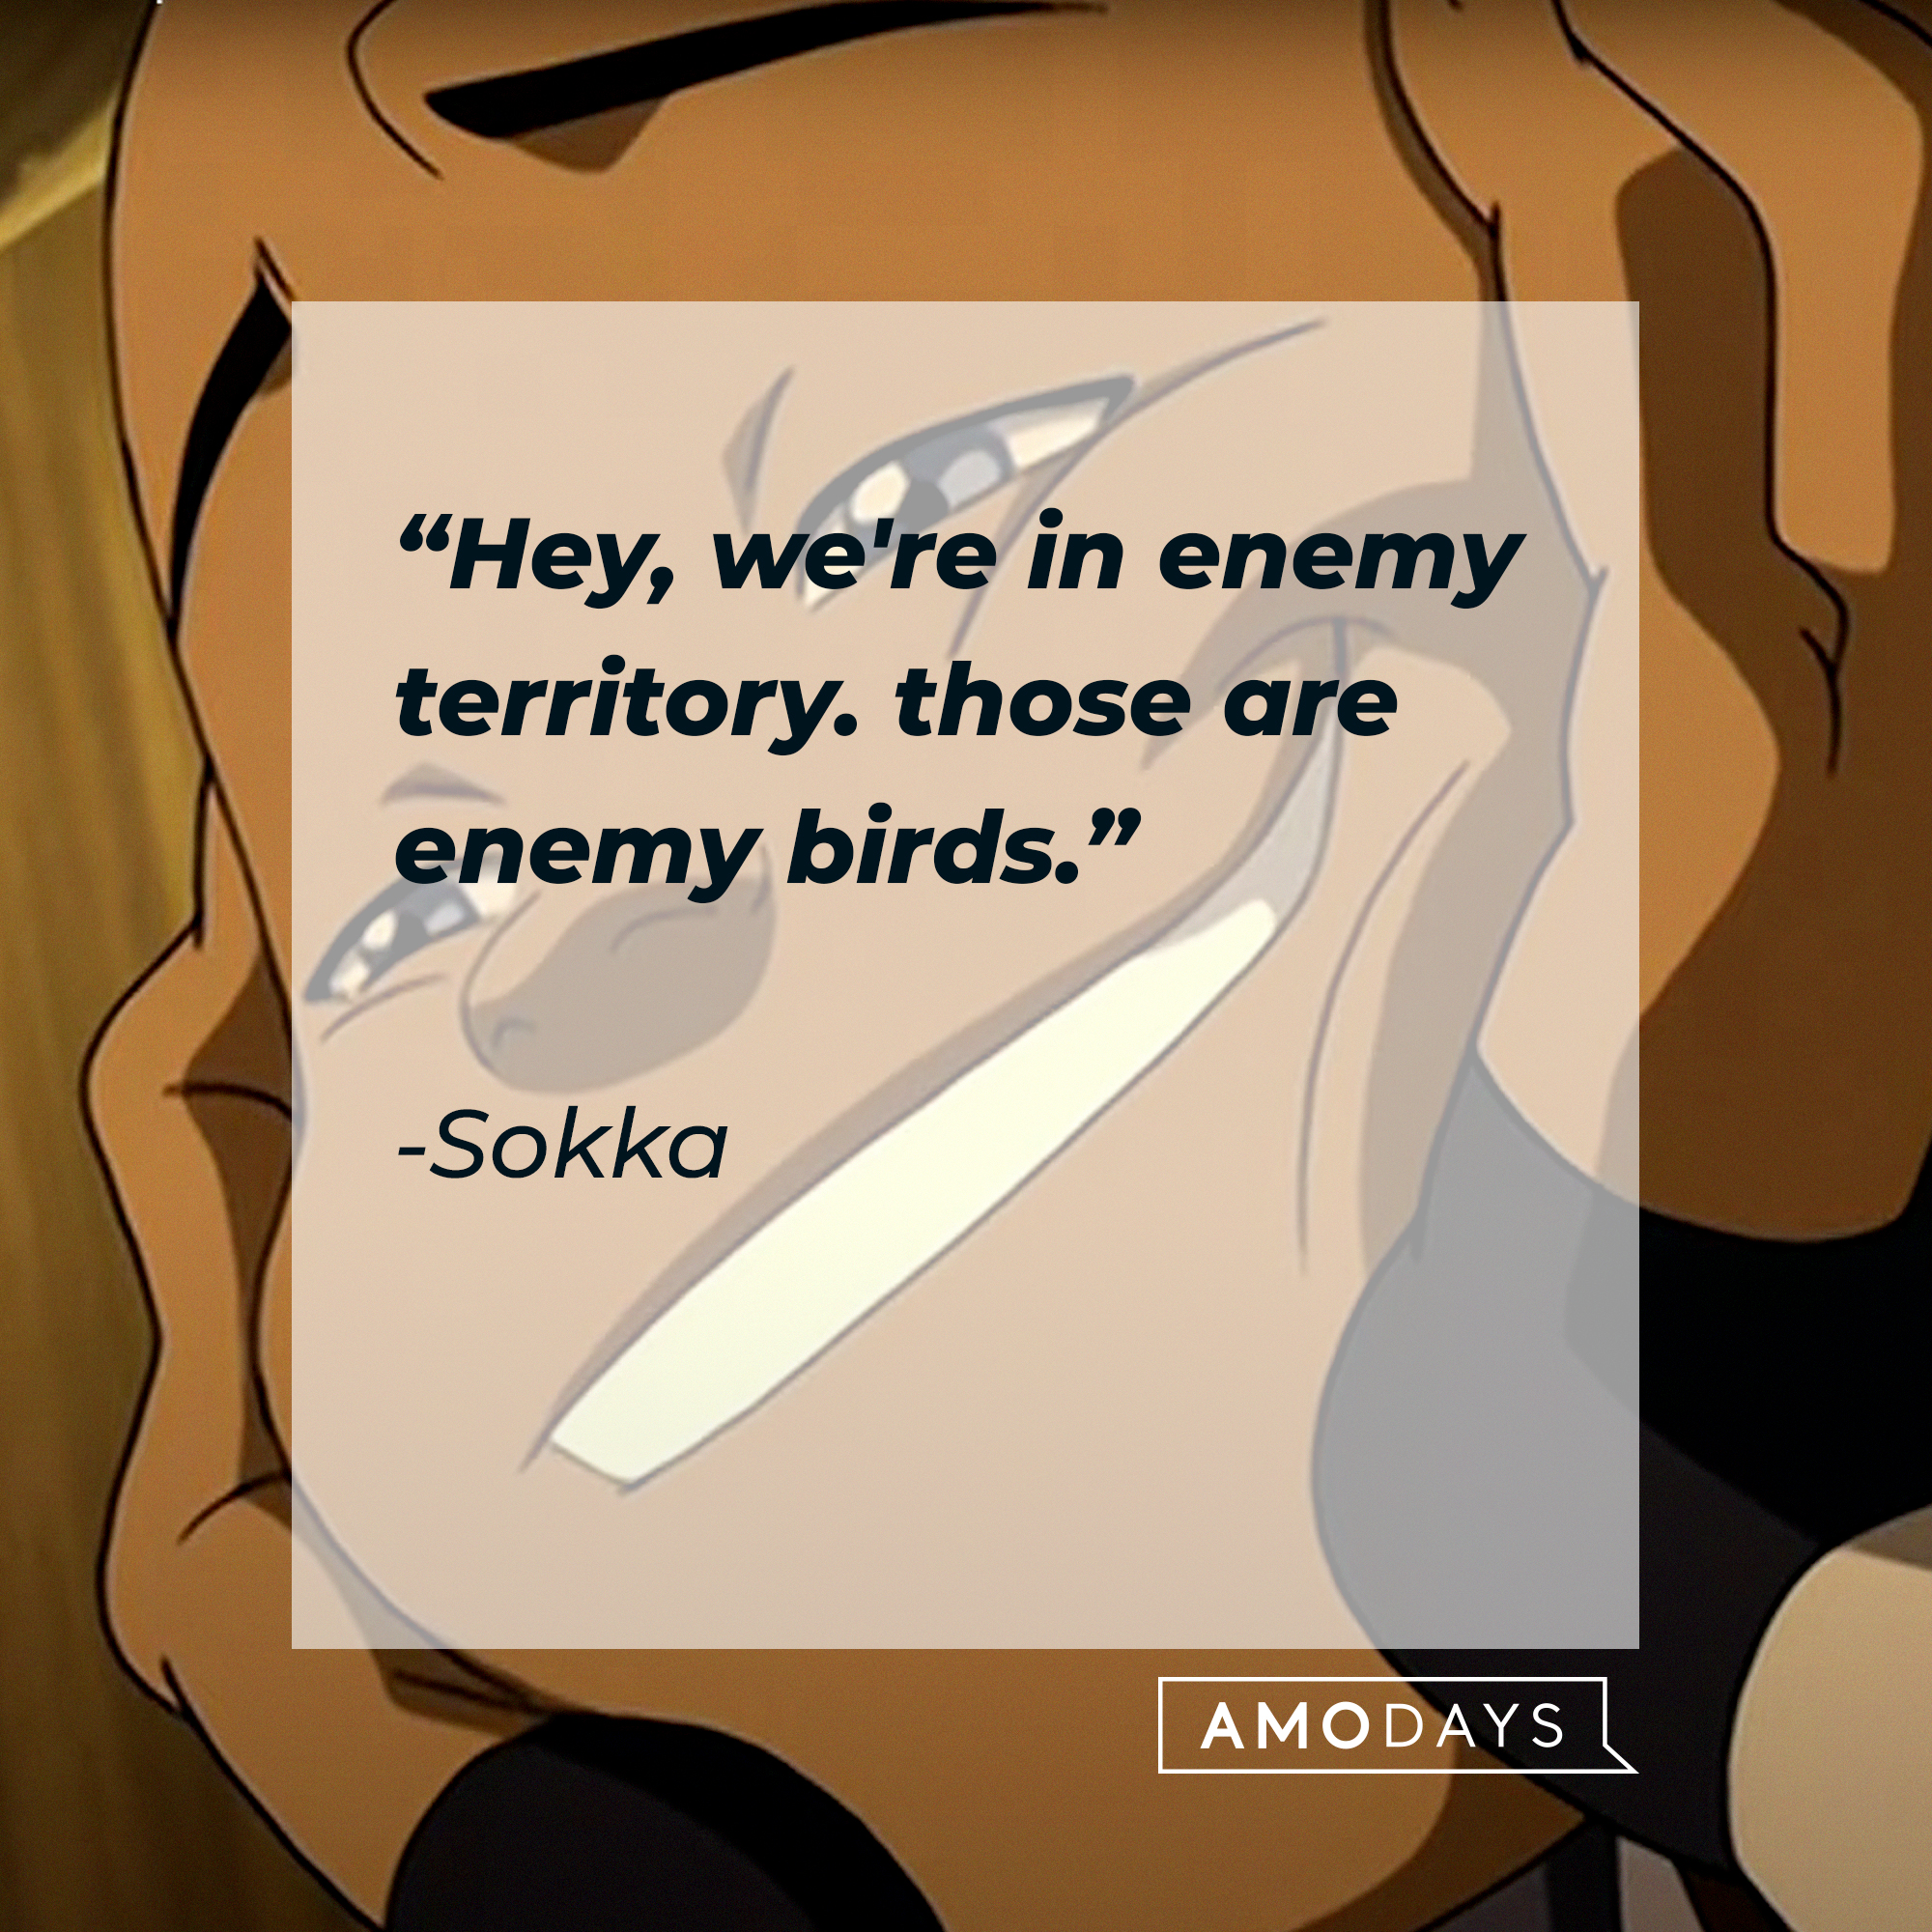 Sokka, with his quote: "Hey, we're in enemy territory. Those are enemy birds." | Source: Youtube.com/TeamAvatar